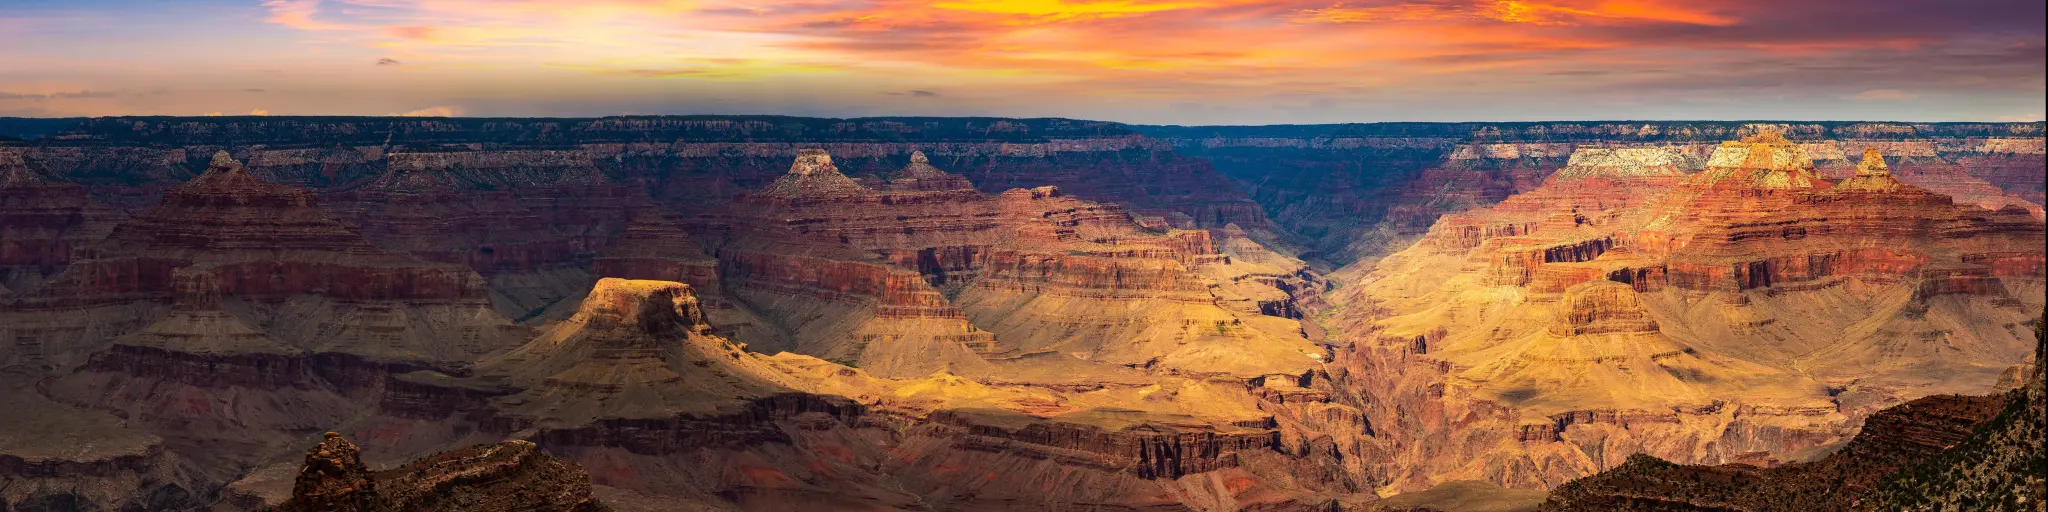 Grand Canyon National Park at sunset, Arizona, USA taken as a panorama with light shining on some of the canyons and a red dramatic sky.